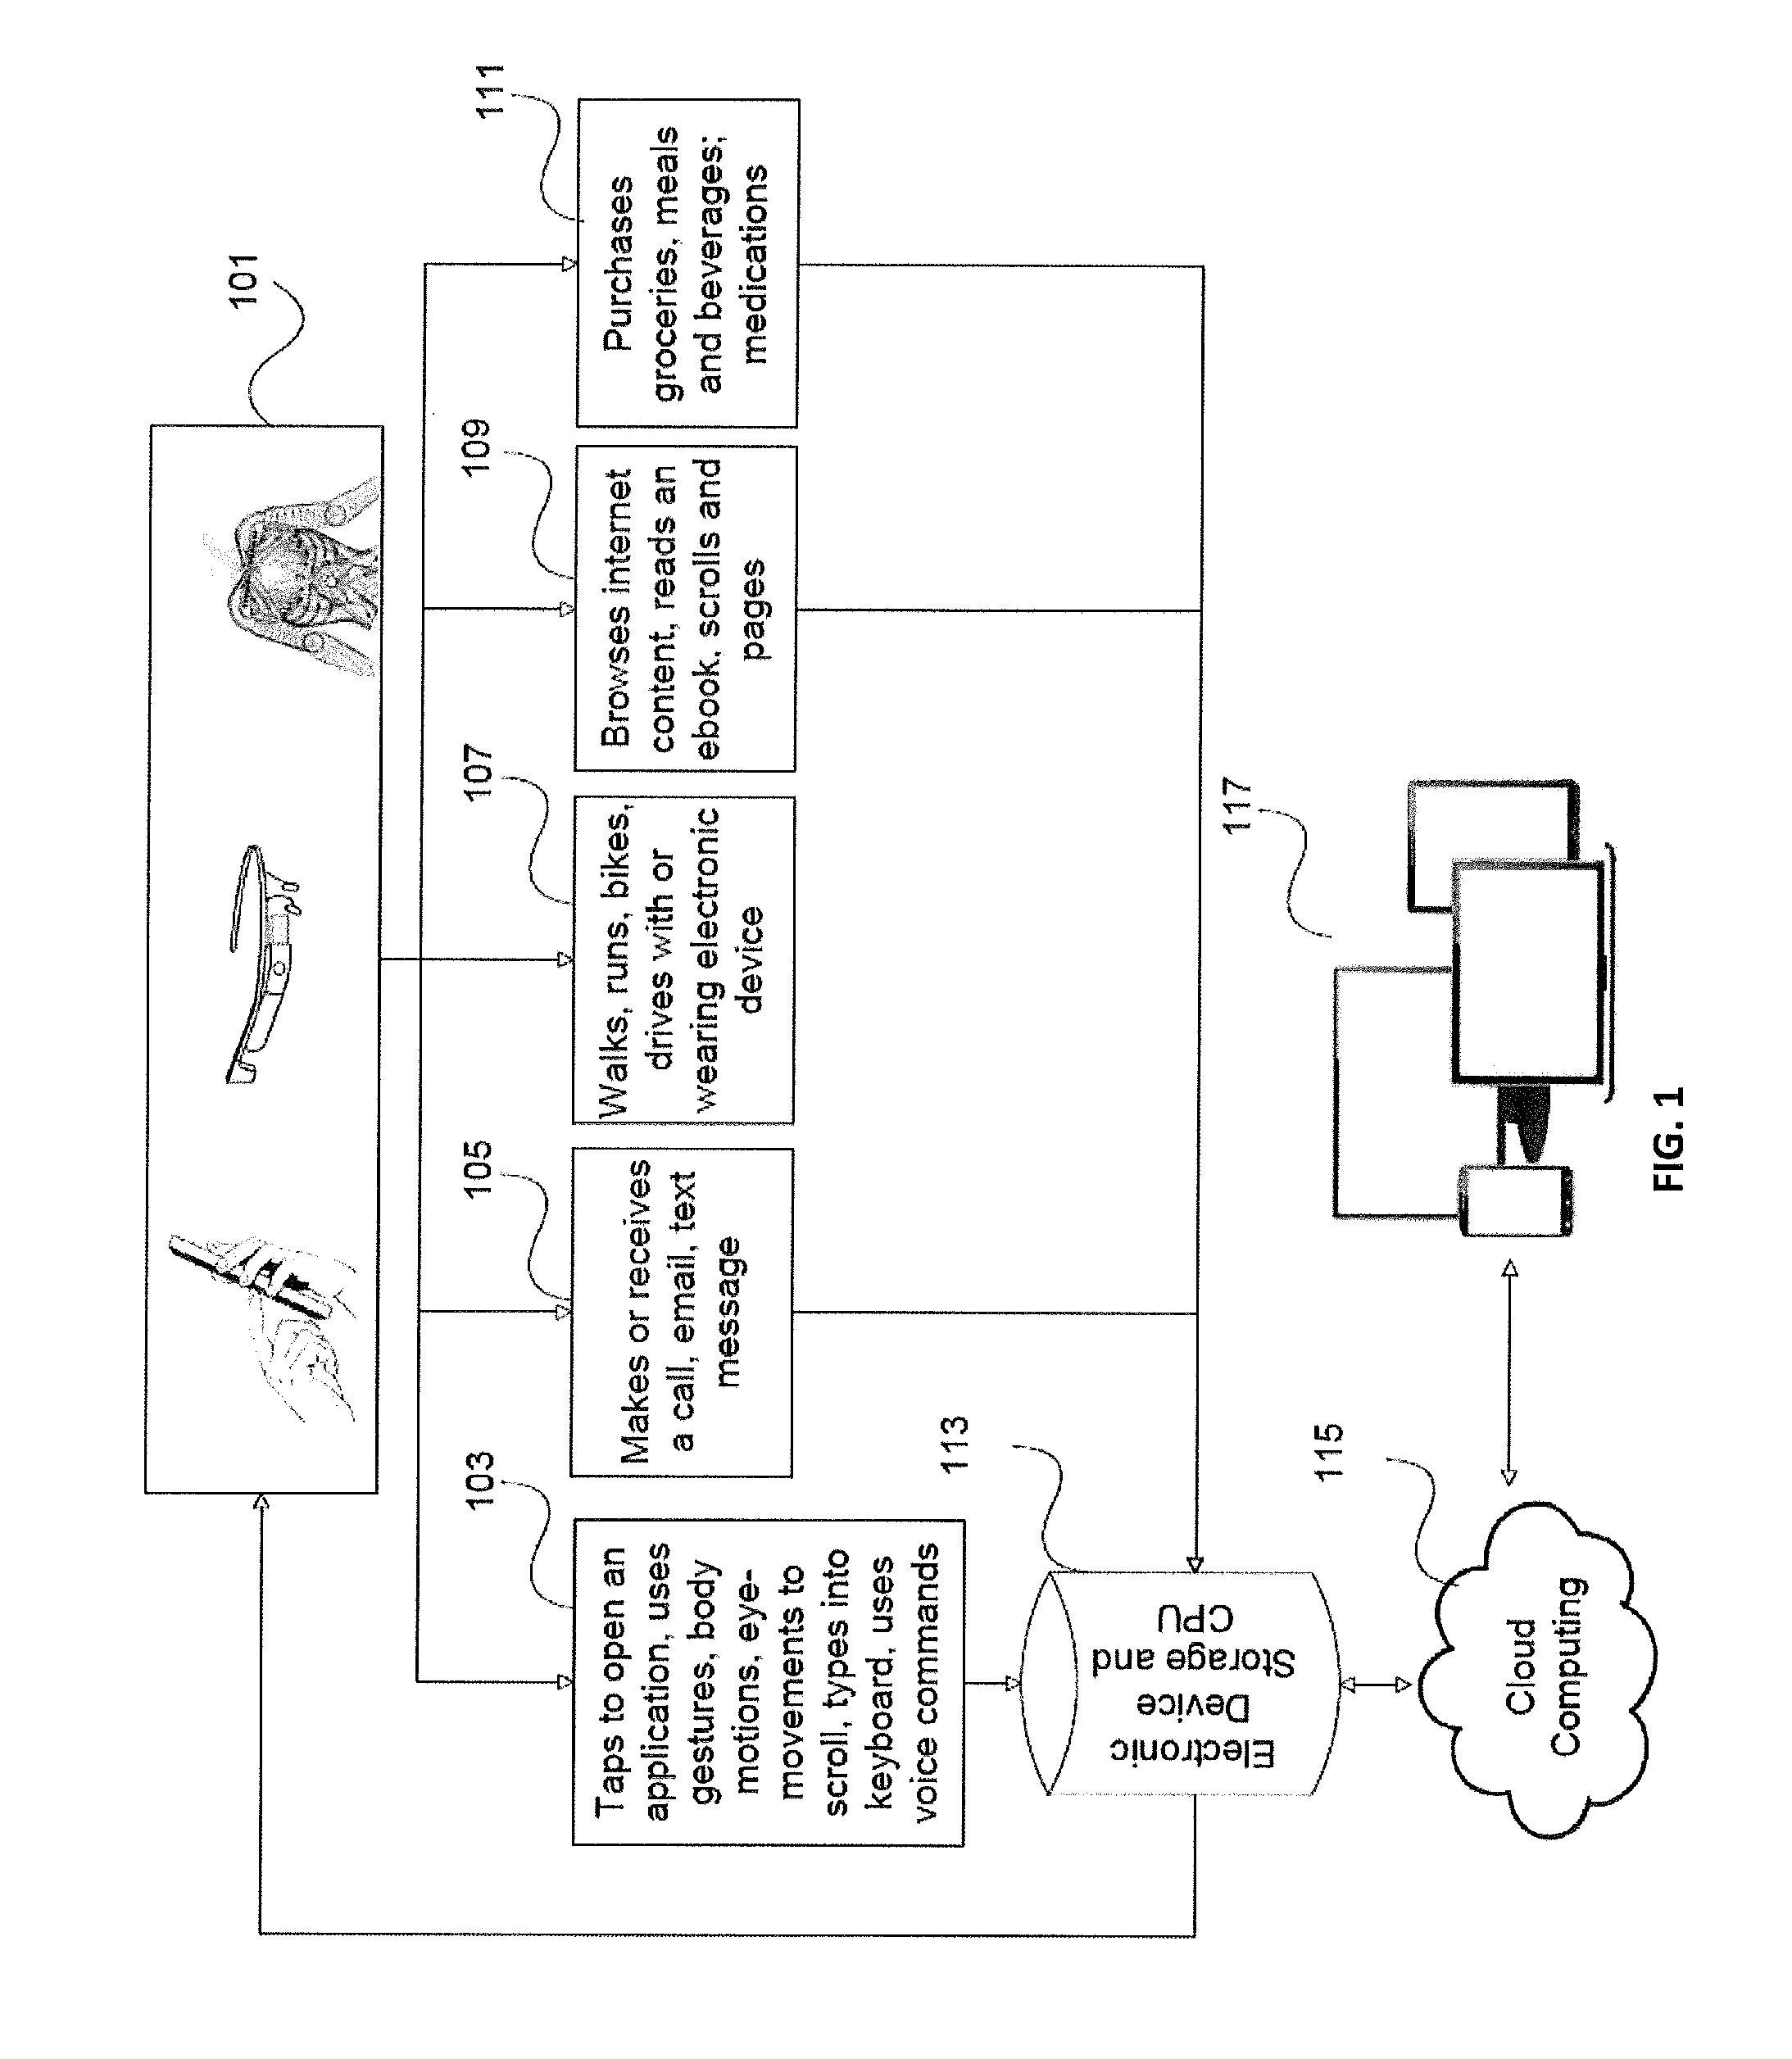 Method and system for assessment of cognitive function based on electronic device usage